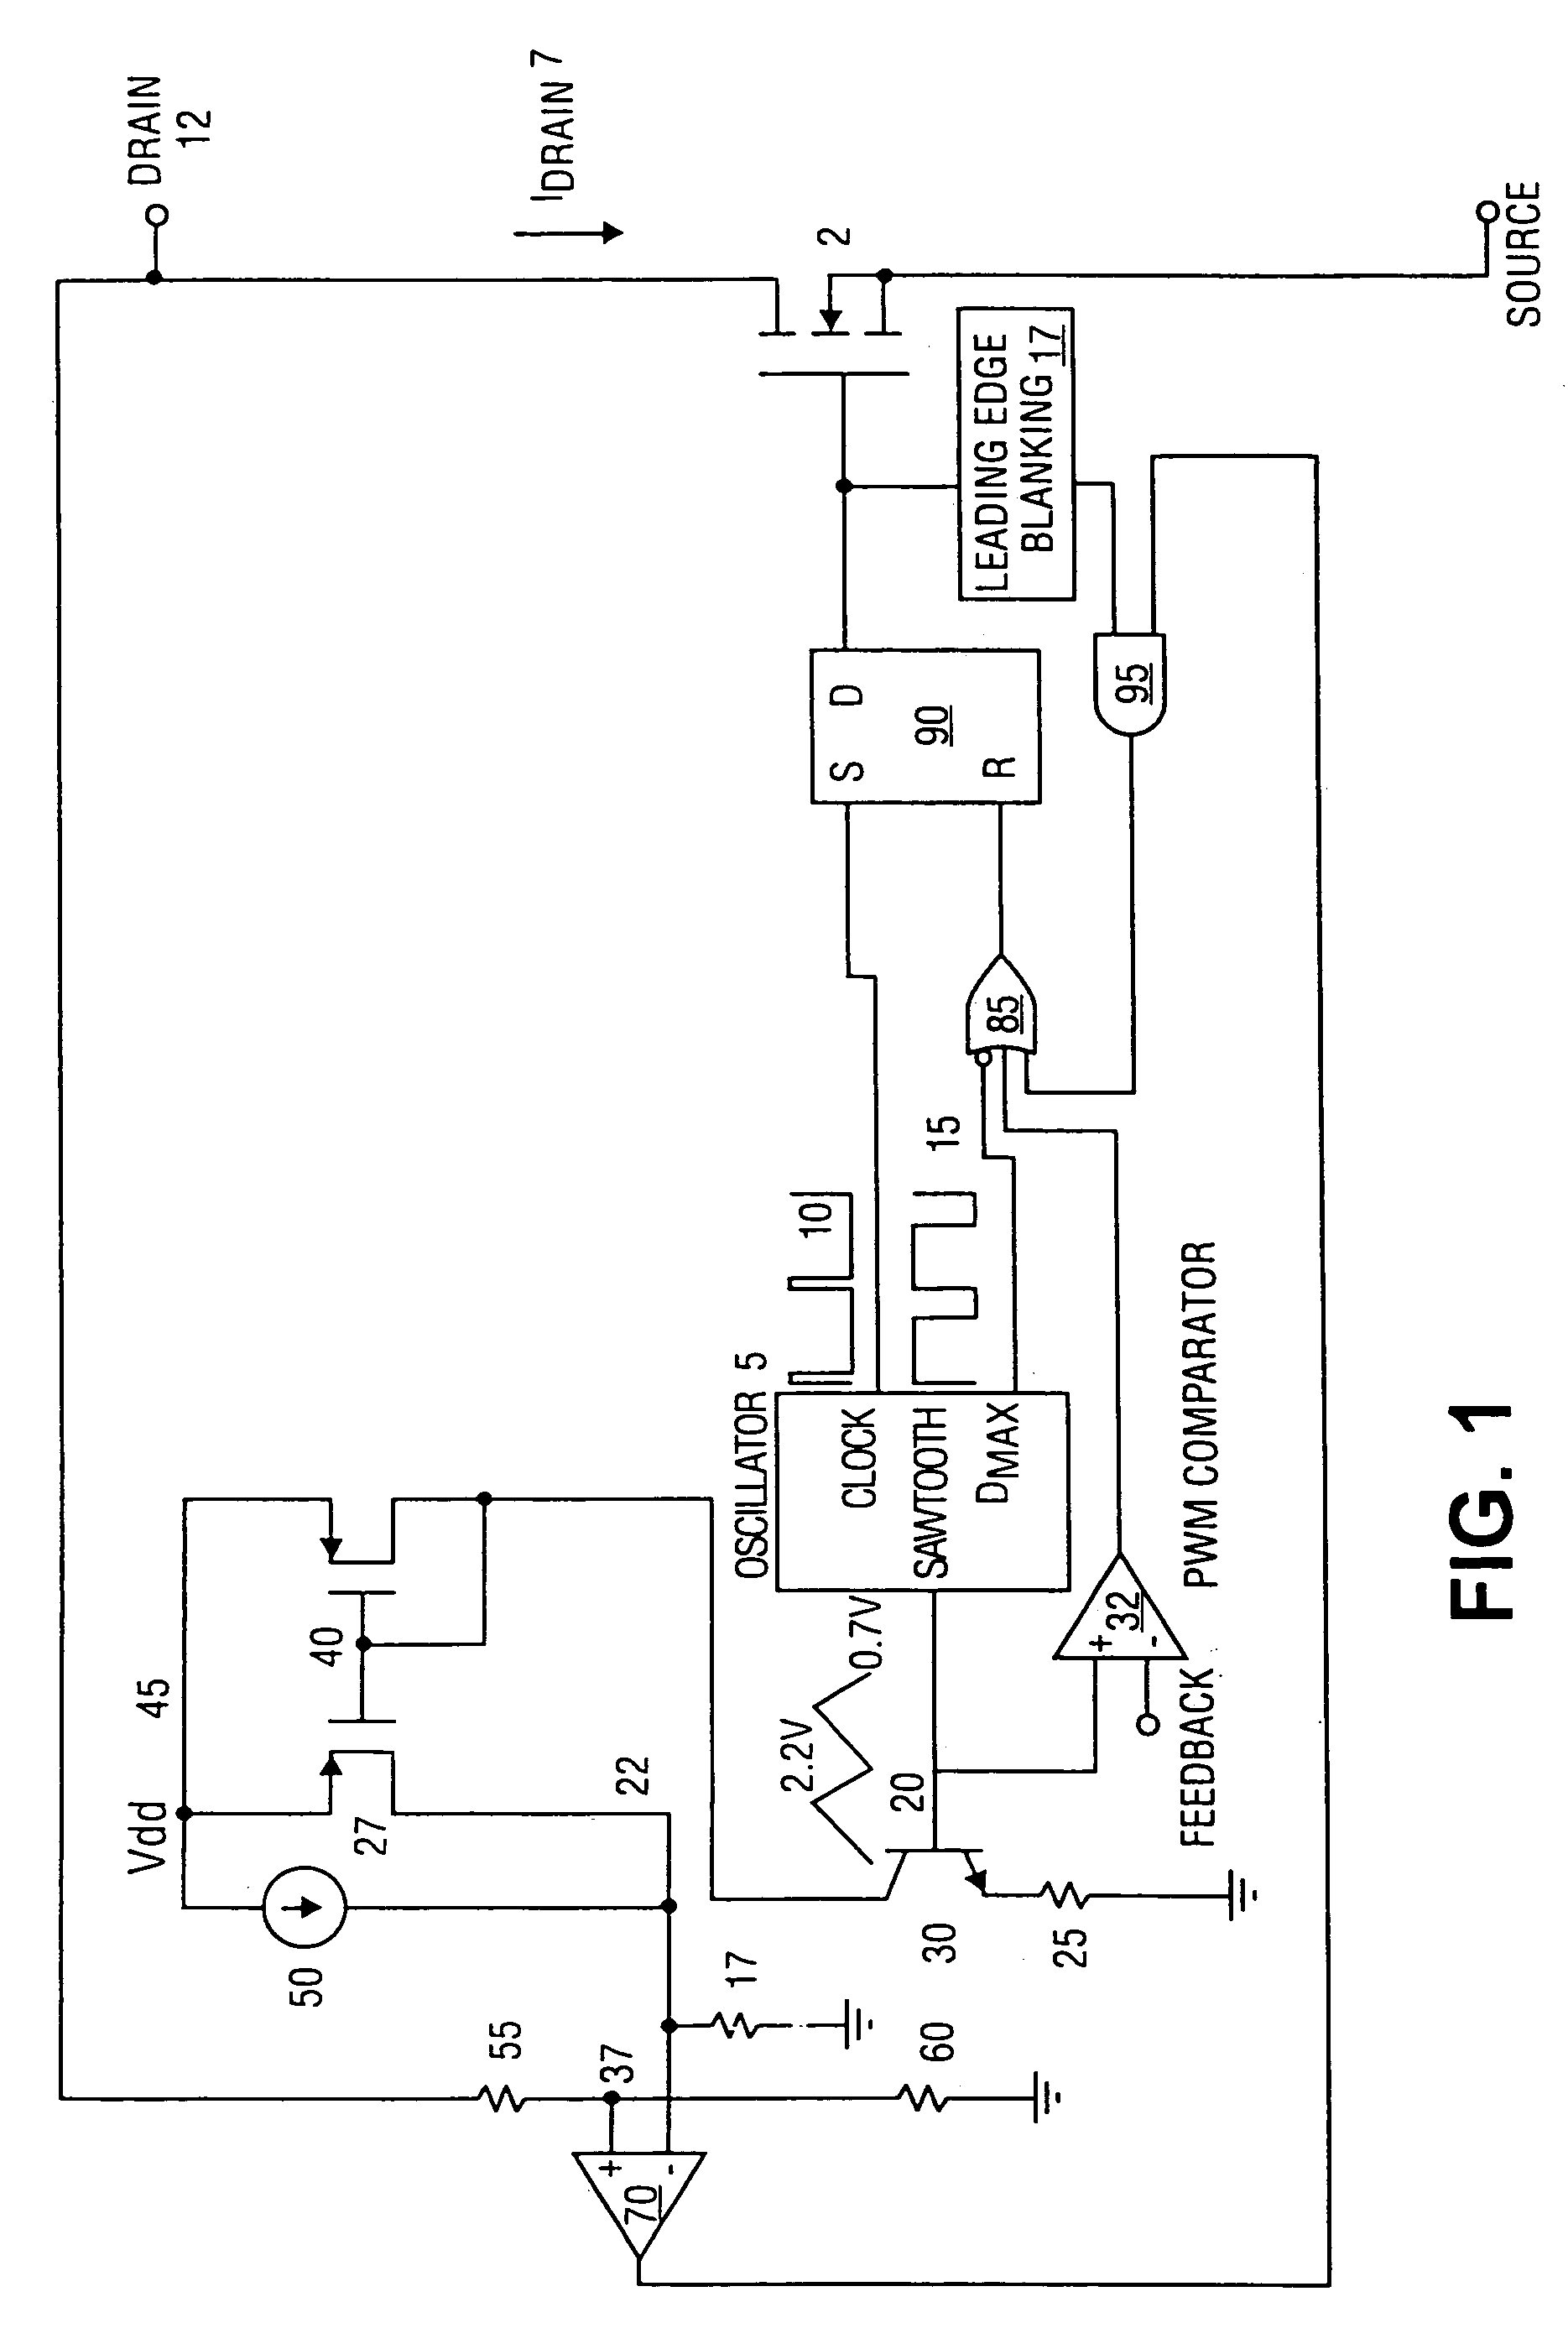 Method and apparatus for maintaining a constant load current with line voltage in a switch mode power supply